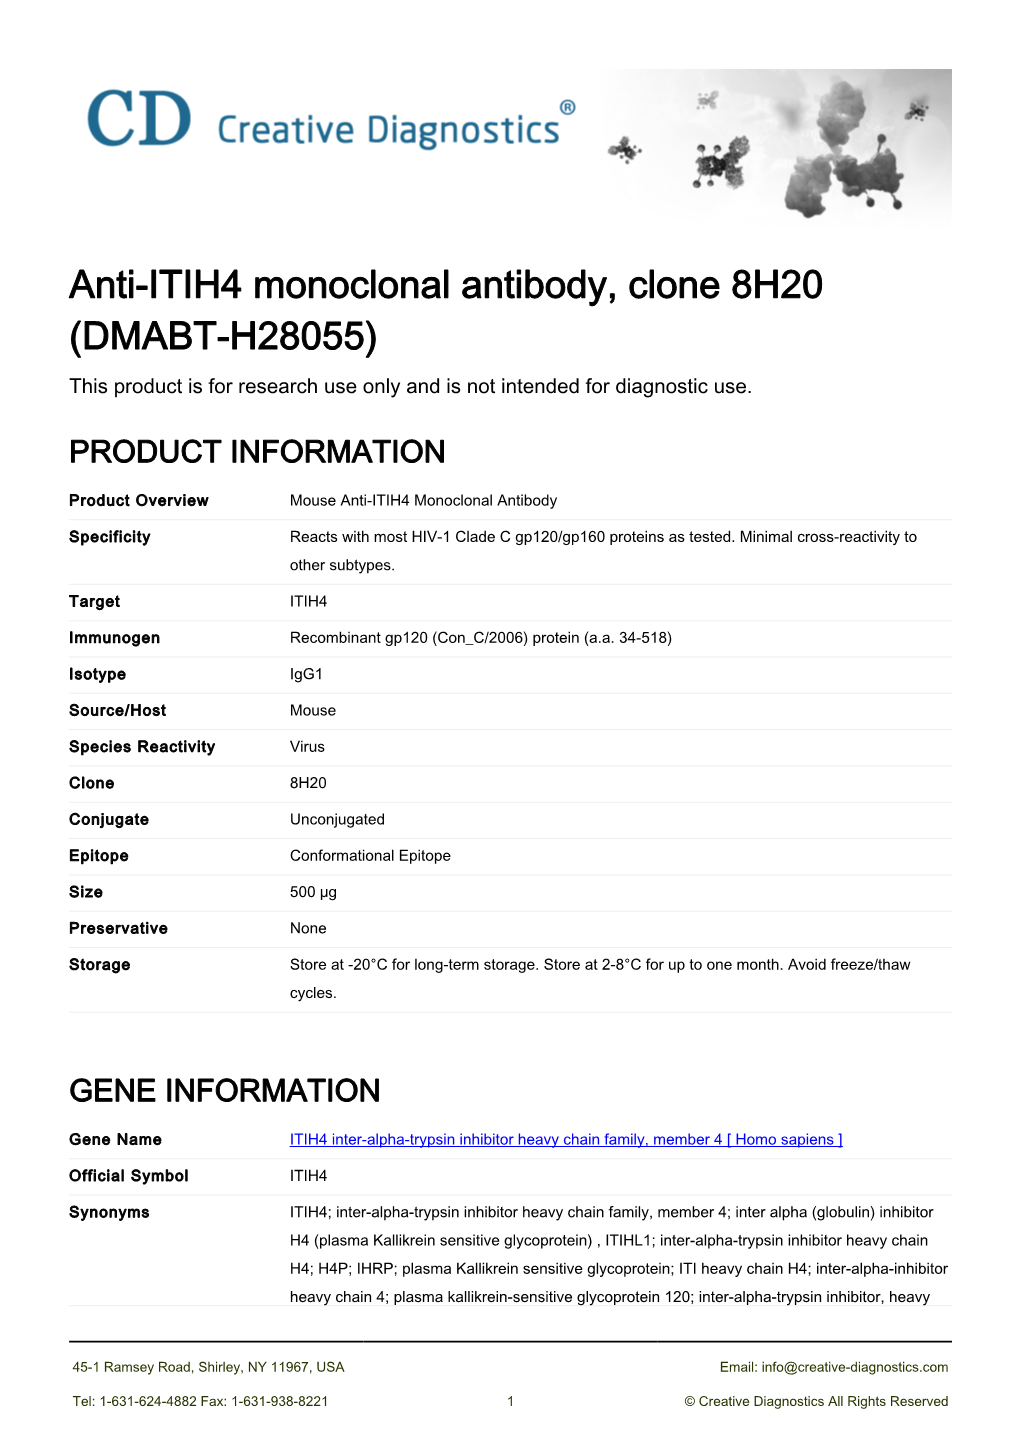 Anti-ITIH4 Monoclonal Antibody, Clone 8H20 (DMABT-H28055) This Product Is for Research Use Only and Is Not Intended for Diagnostic Use